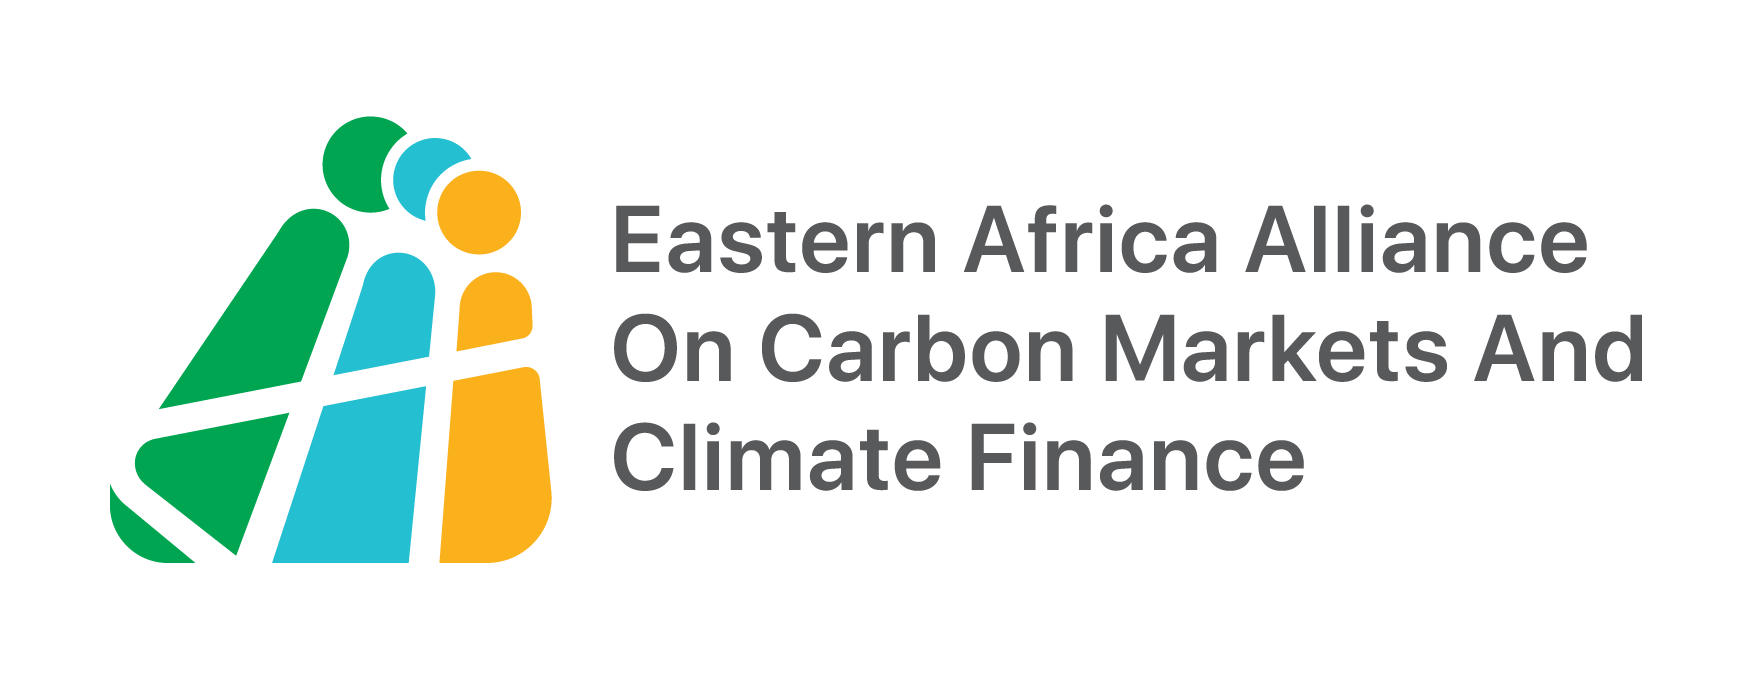 Eastern Africa Alliance on Carbon Markets and Climate Finance